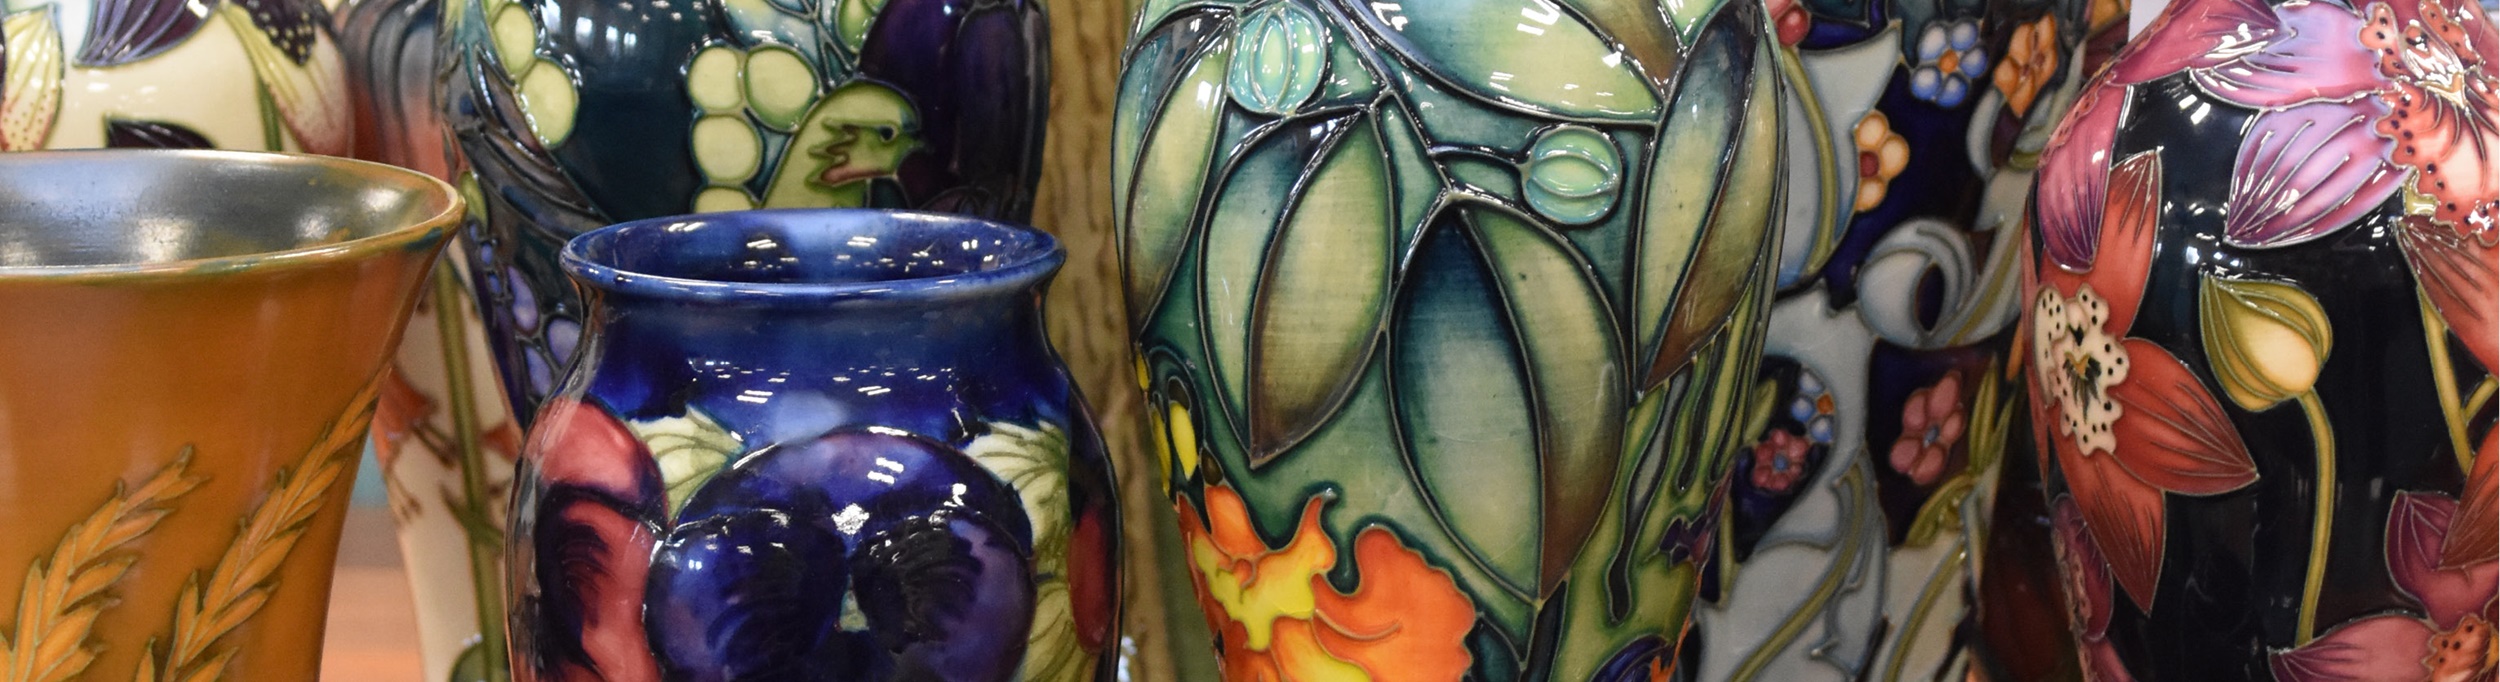 Timed Moorcroft Pottery Auction